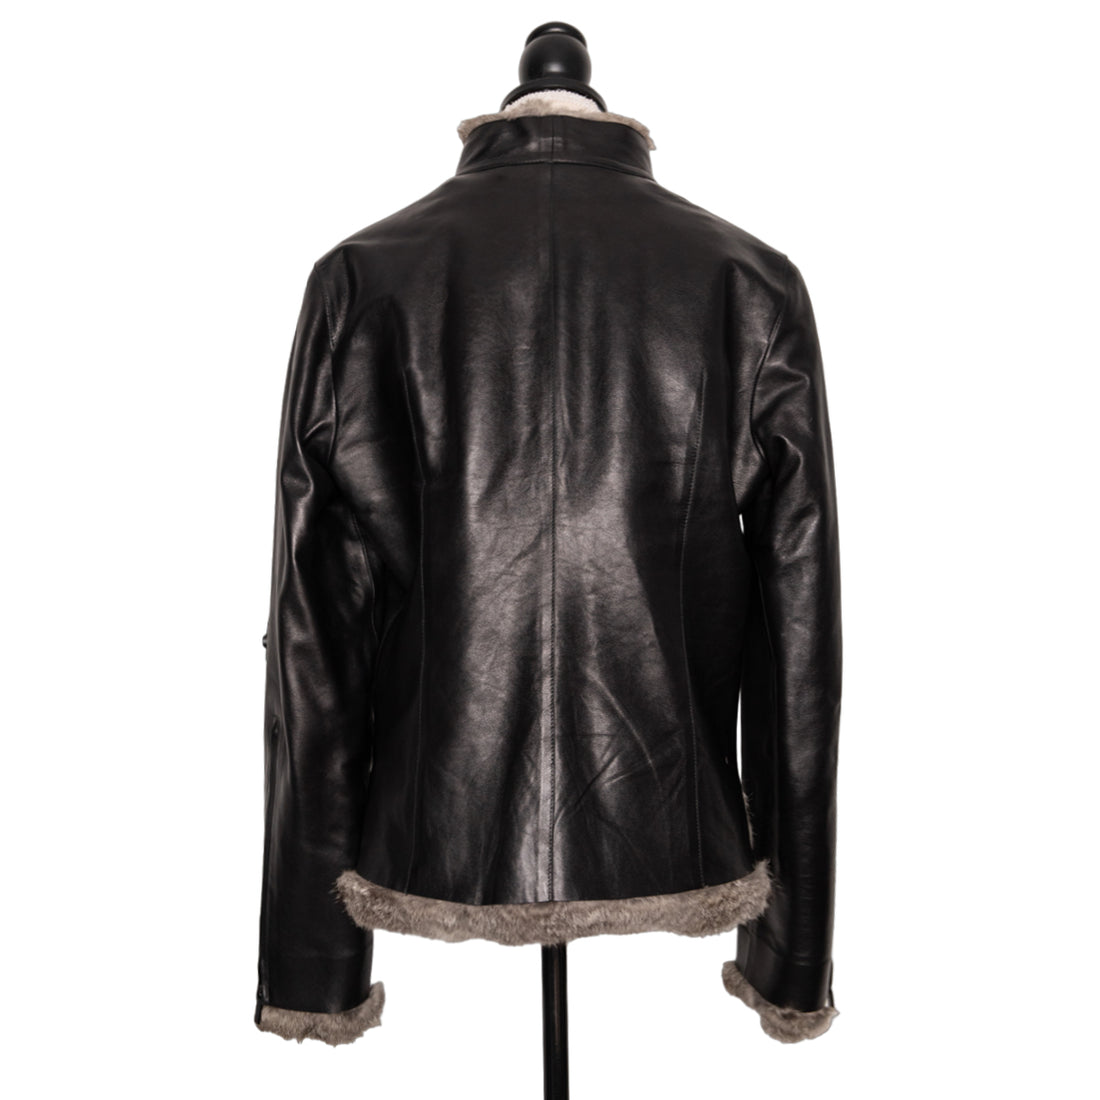 Gucci leather jacket with removable fur